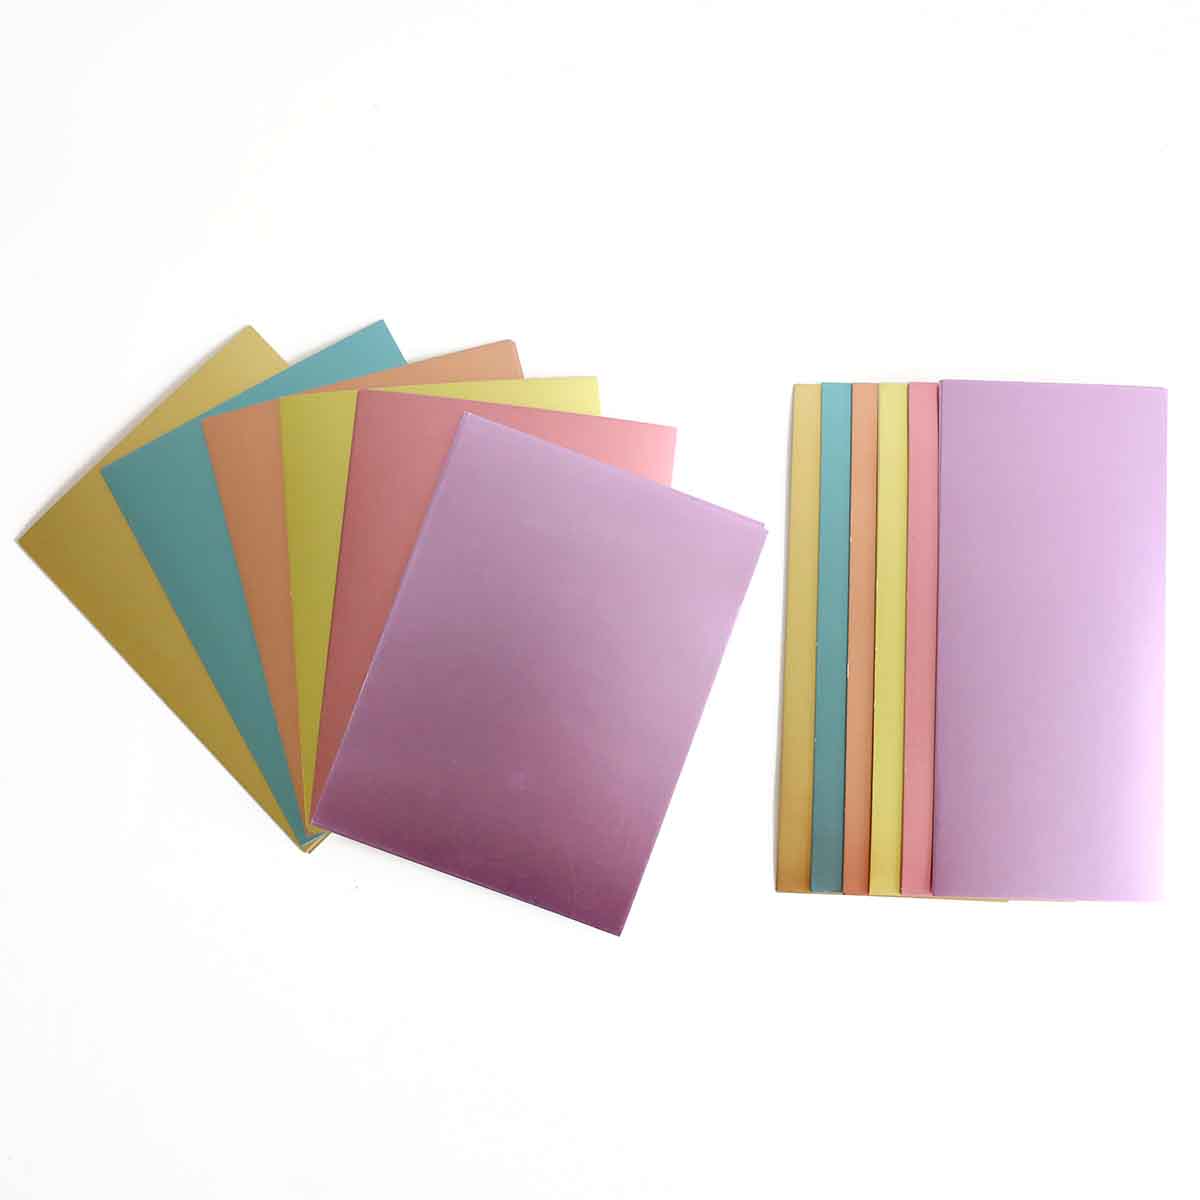 a pile of different colored papers on a white surface.